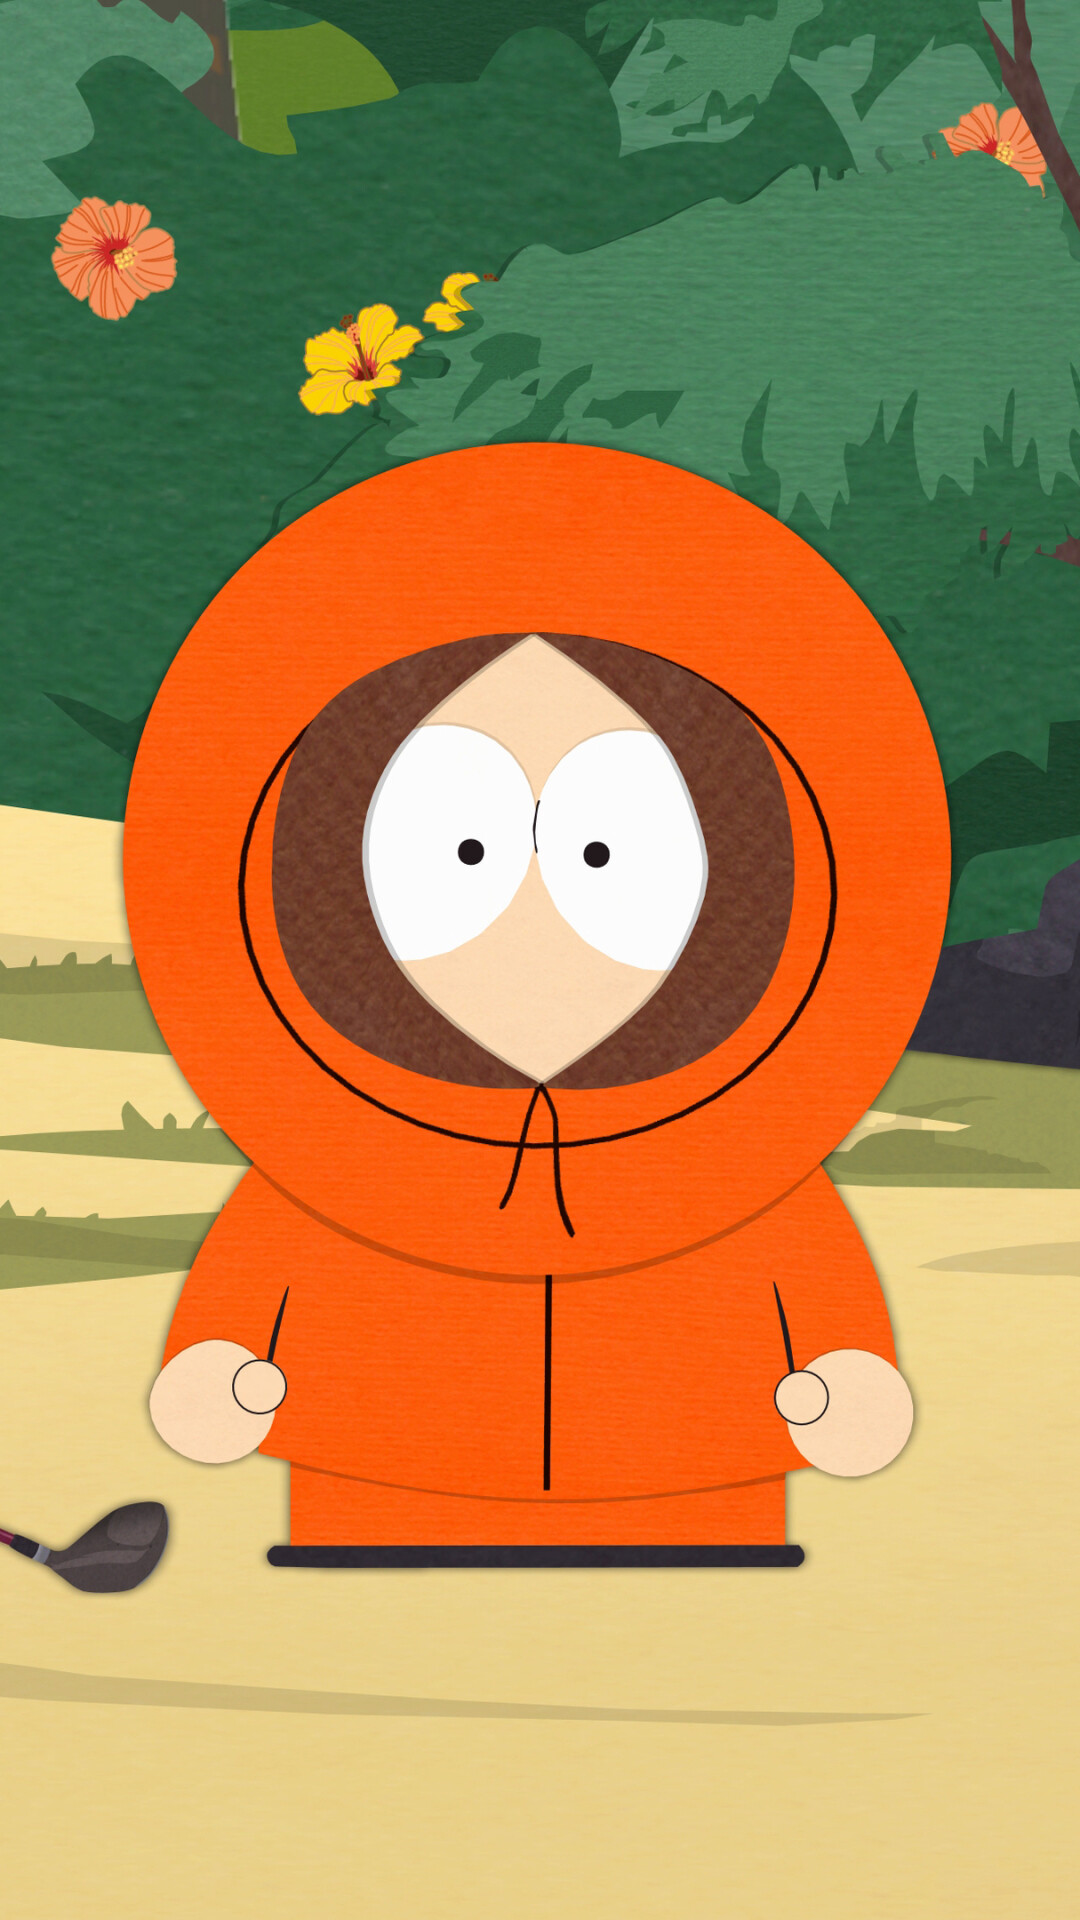 South Park: Kenny McCormick, canonically has an ability to resurrect after dying. 1080x1920 Full HD Wallpaper.